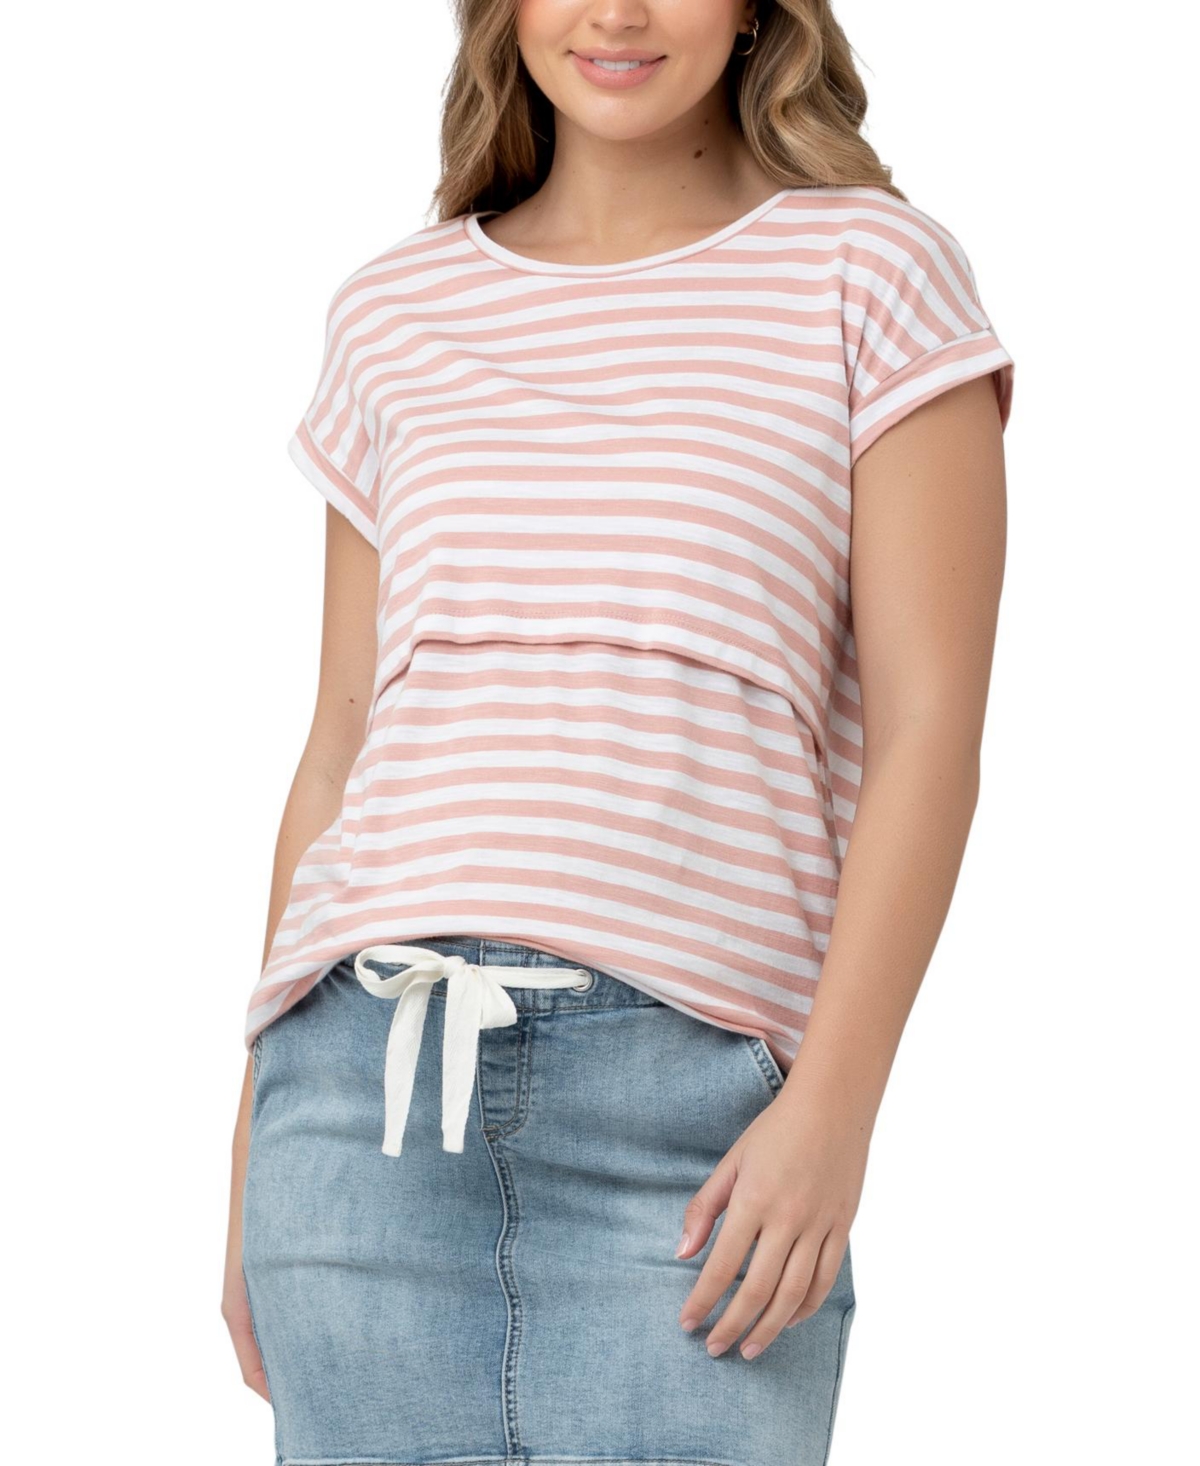 Maternity Lionel St Nursing Up/Down Tee - Dusty pink / white